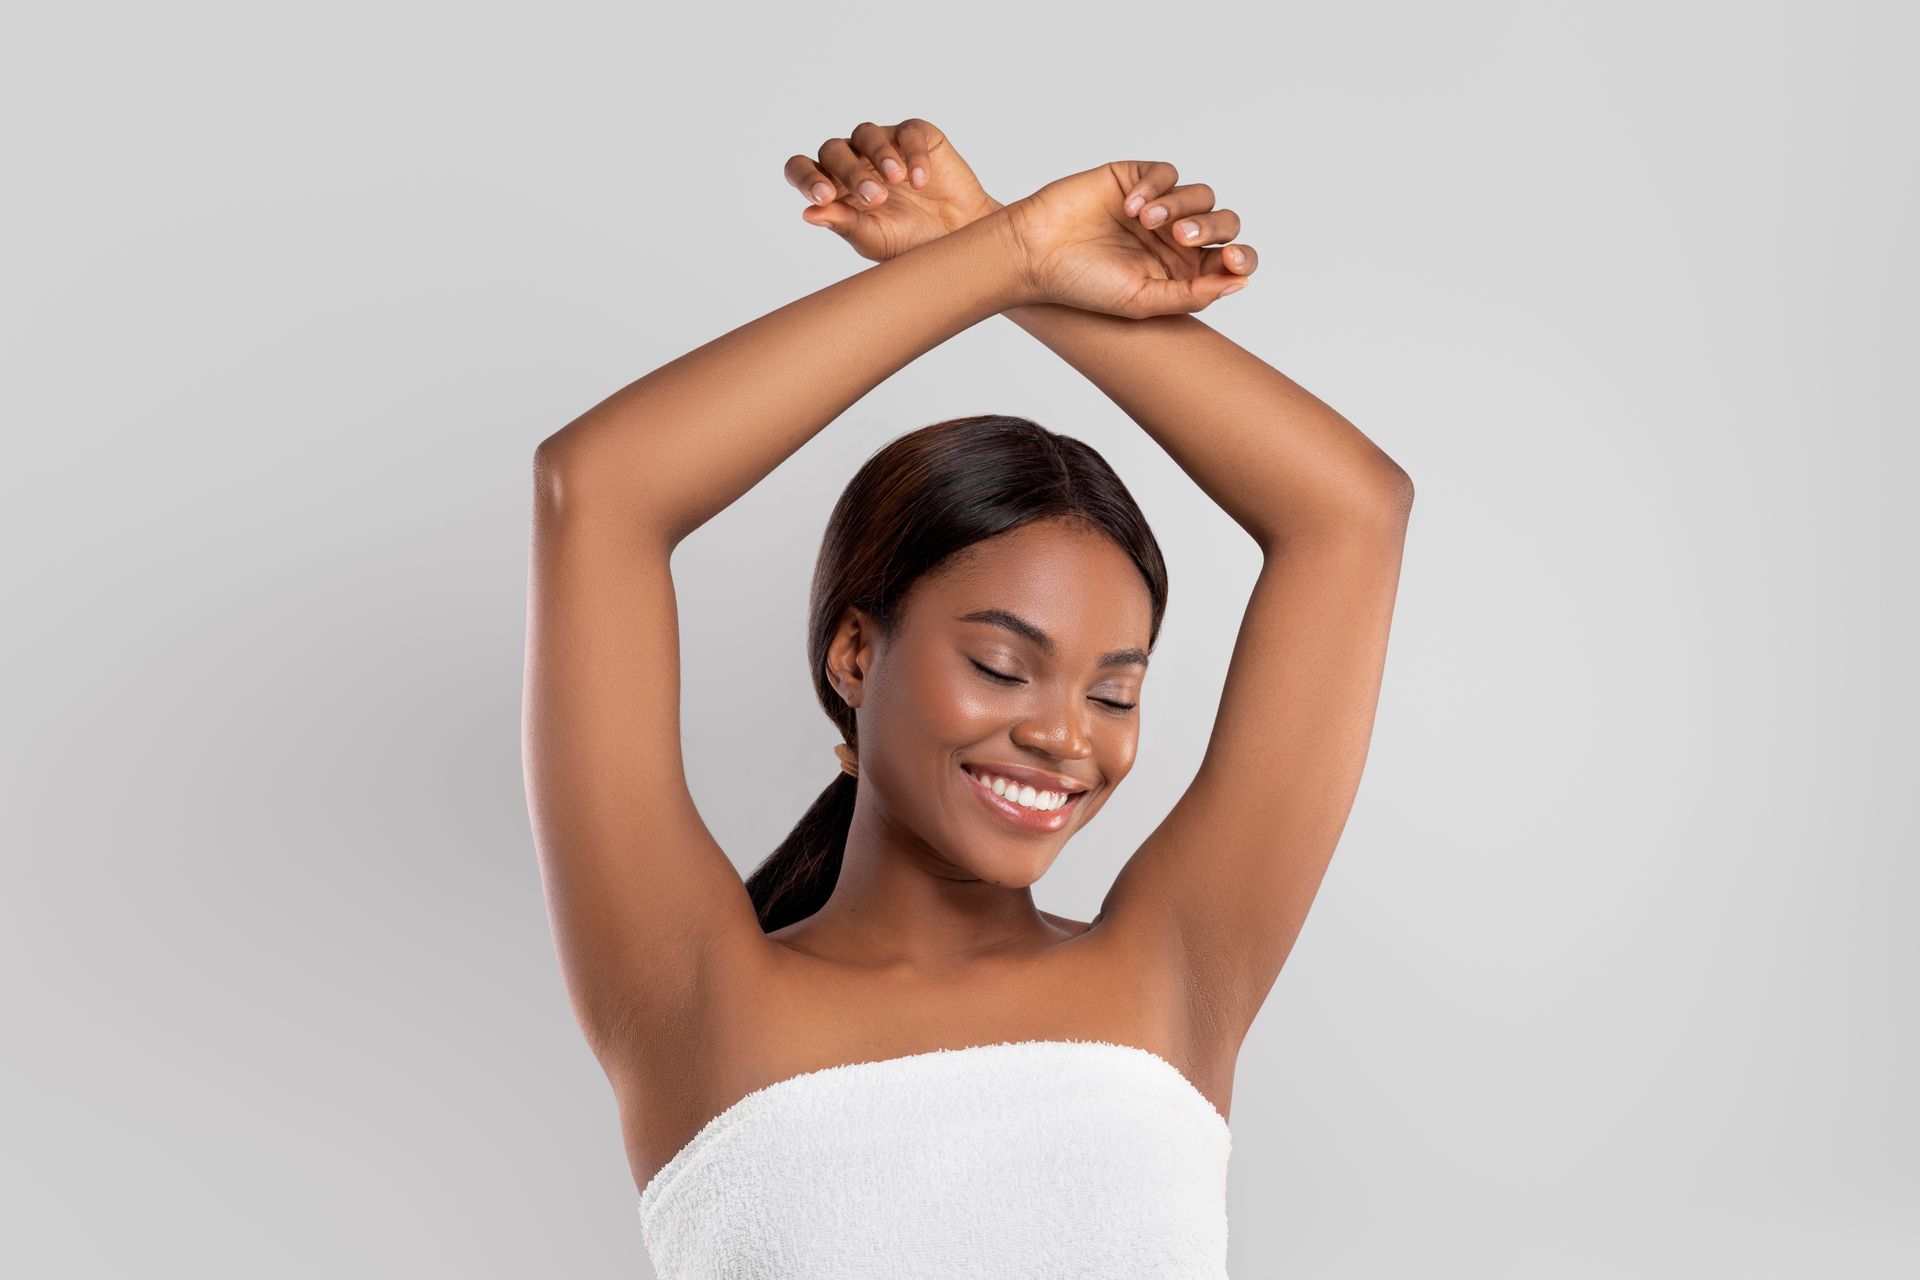 a woman wrapped in a white towel is smiling with her arms in the air .